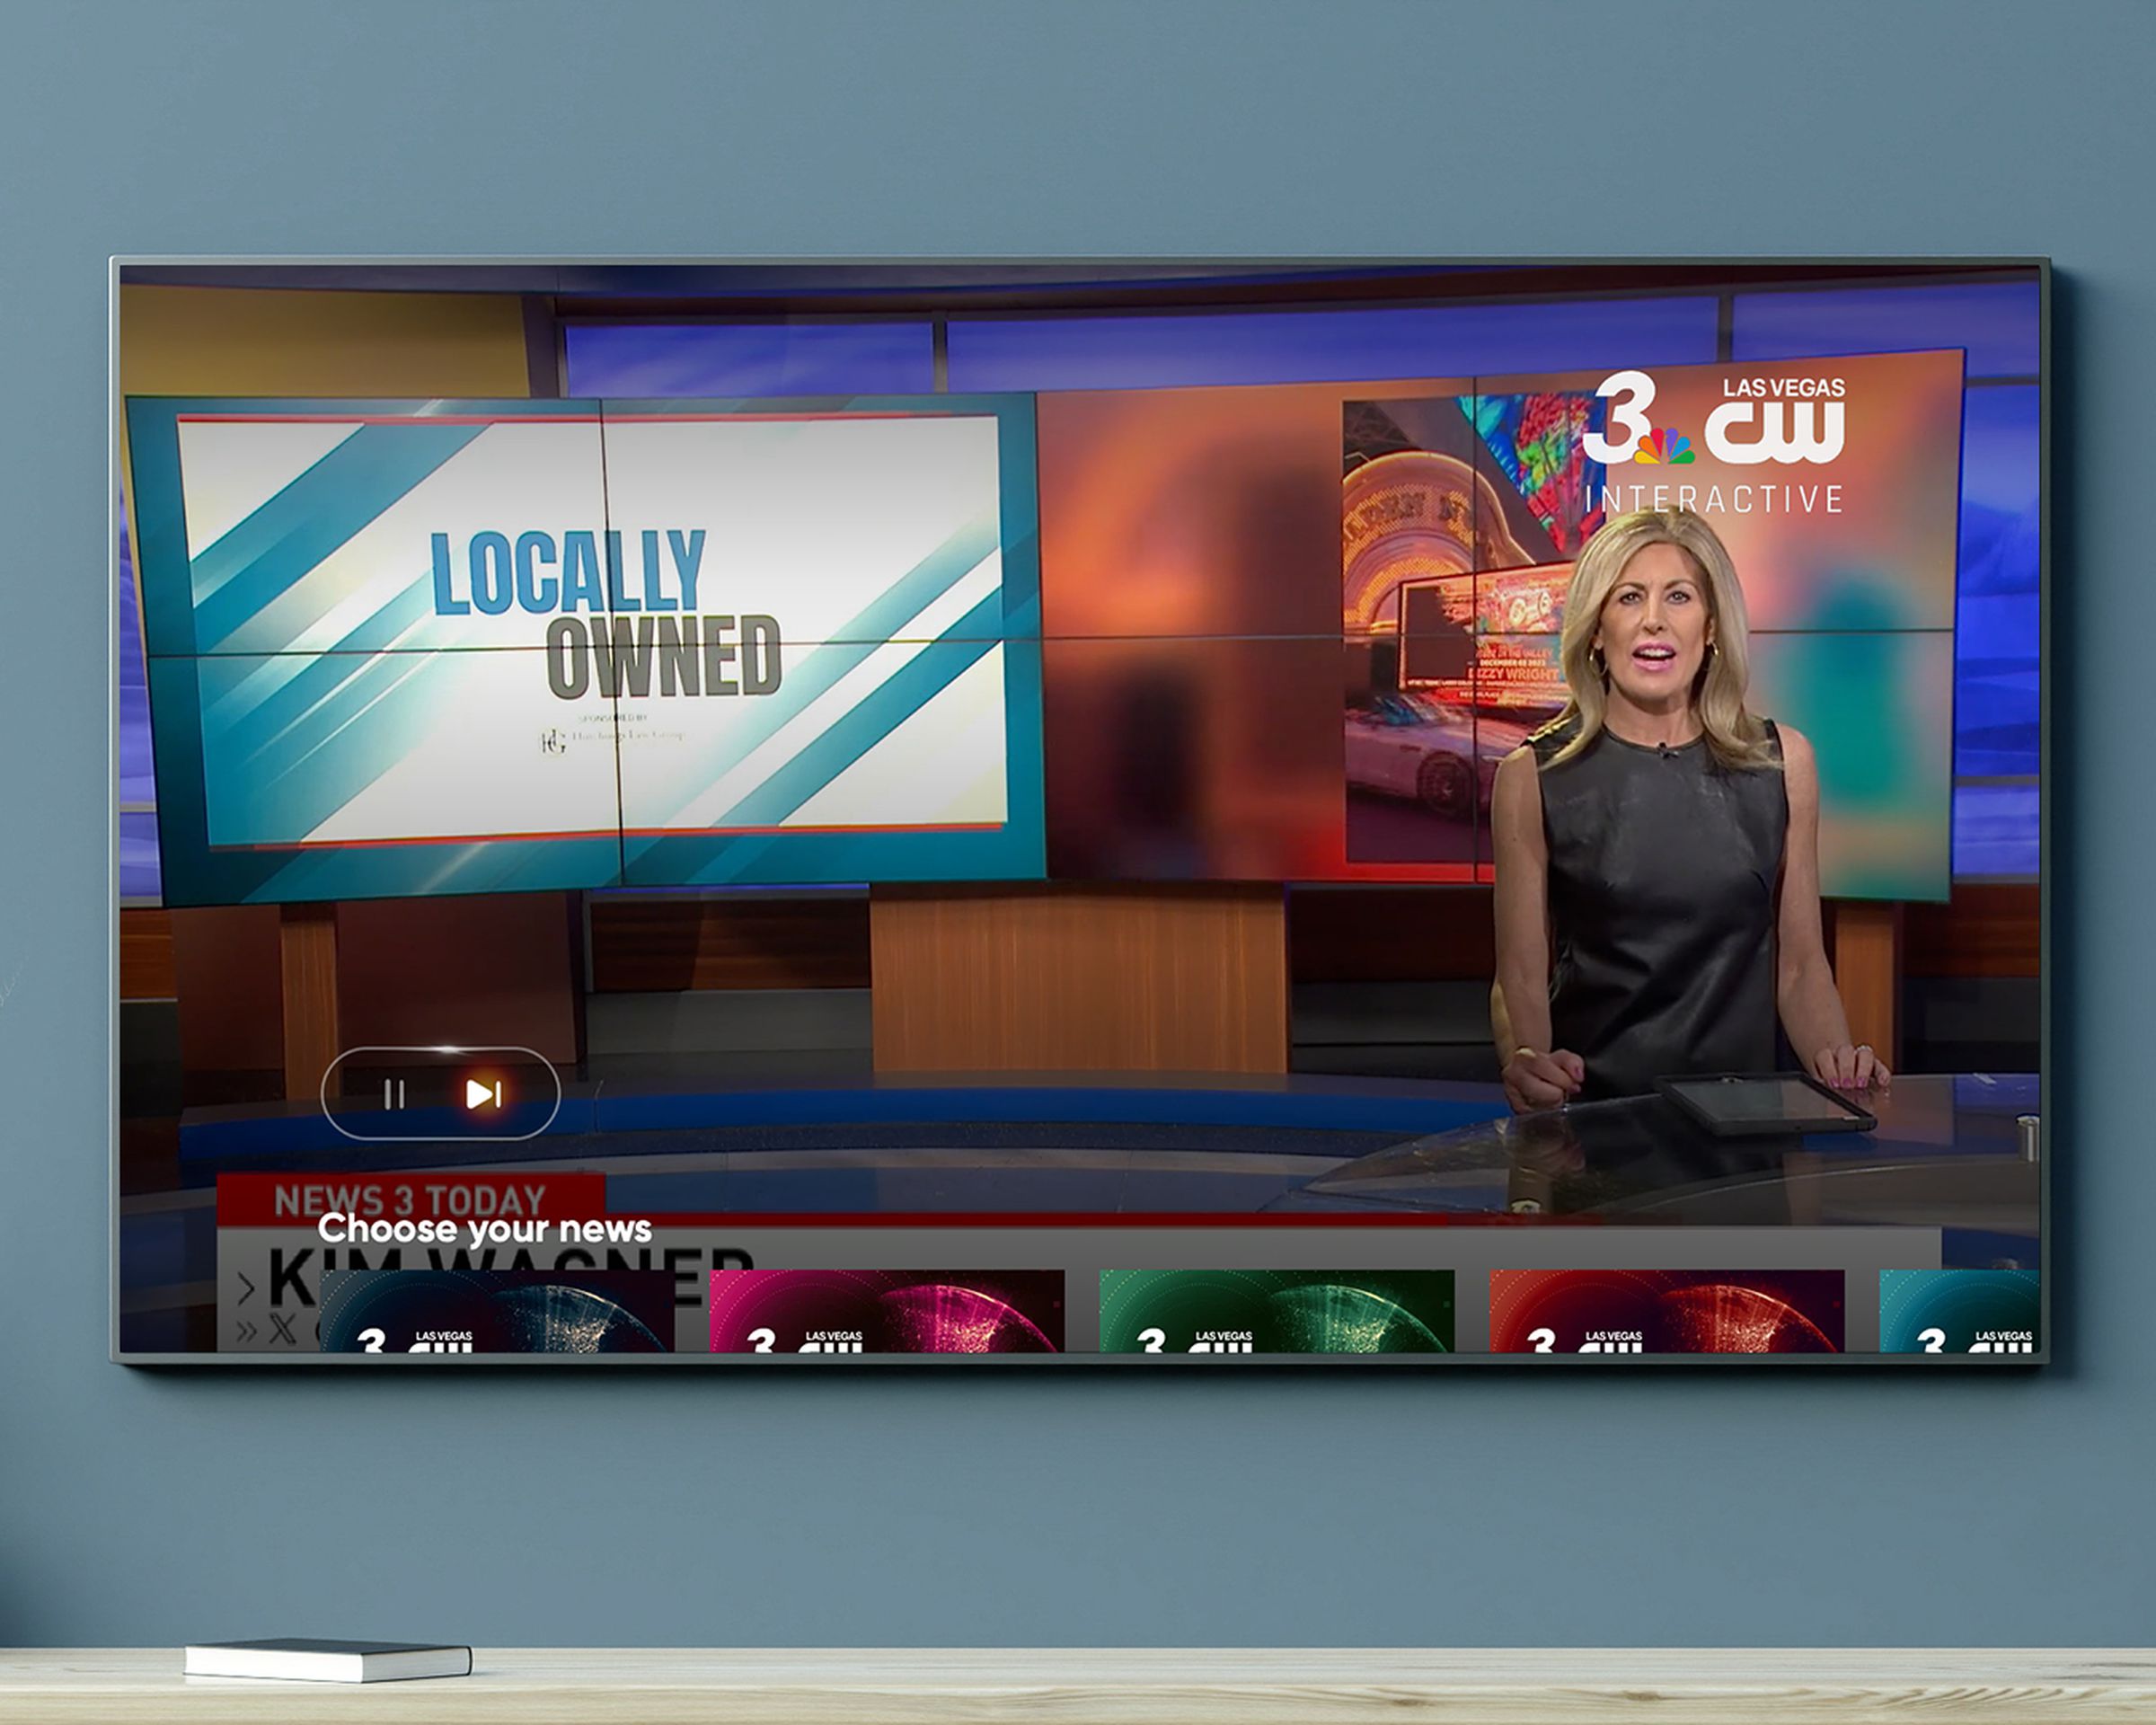 An image of a local news channel, and pause and play button are prominently displayed in the lower-left corner despite this being a broadcast station.